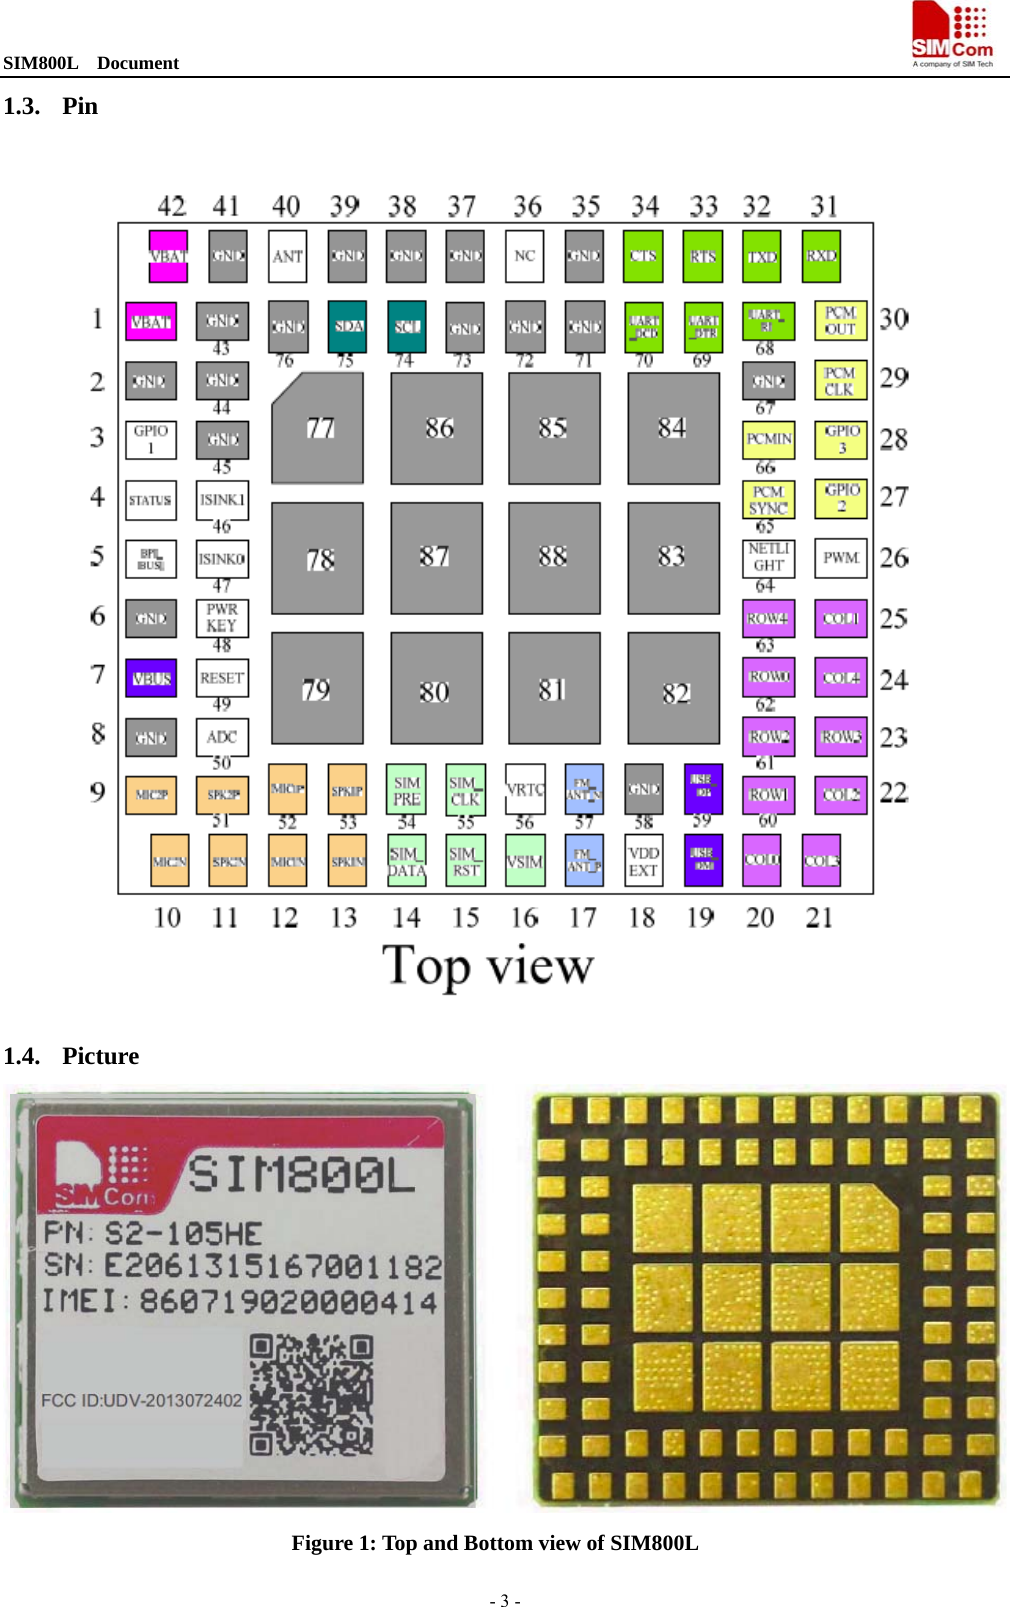 SIM800L  Document                                                                                - 3 - 1.3. Pin   1.4. Picture  Figure 1: Top and Bottom view of SIM800L 